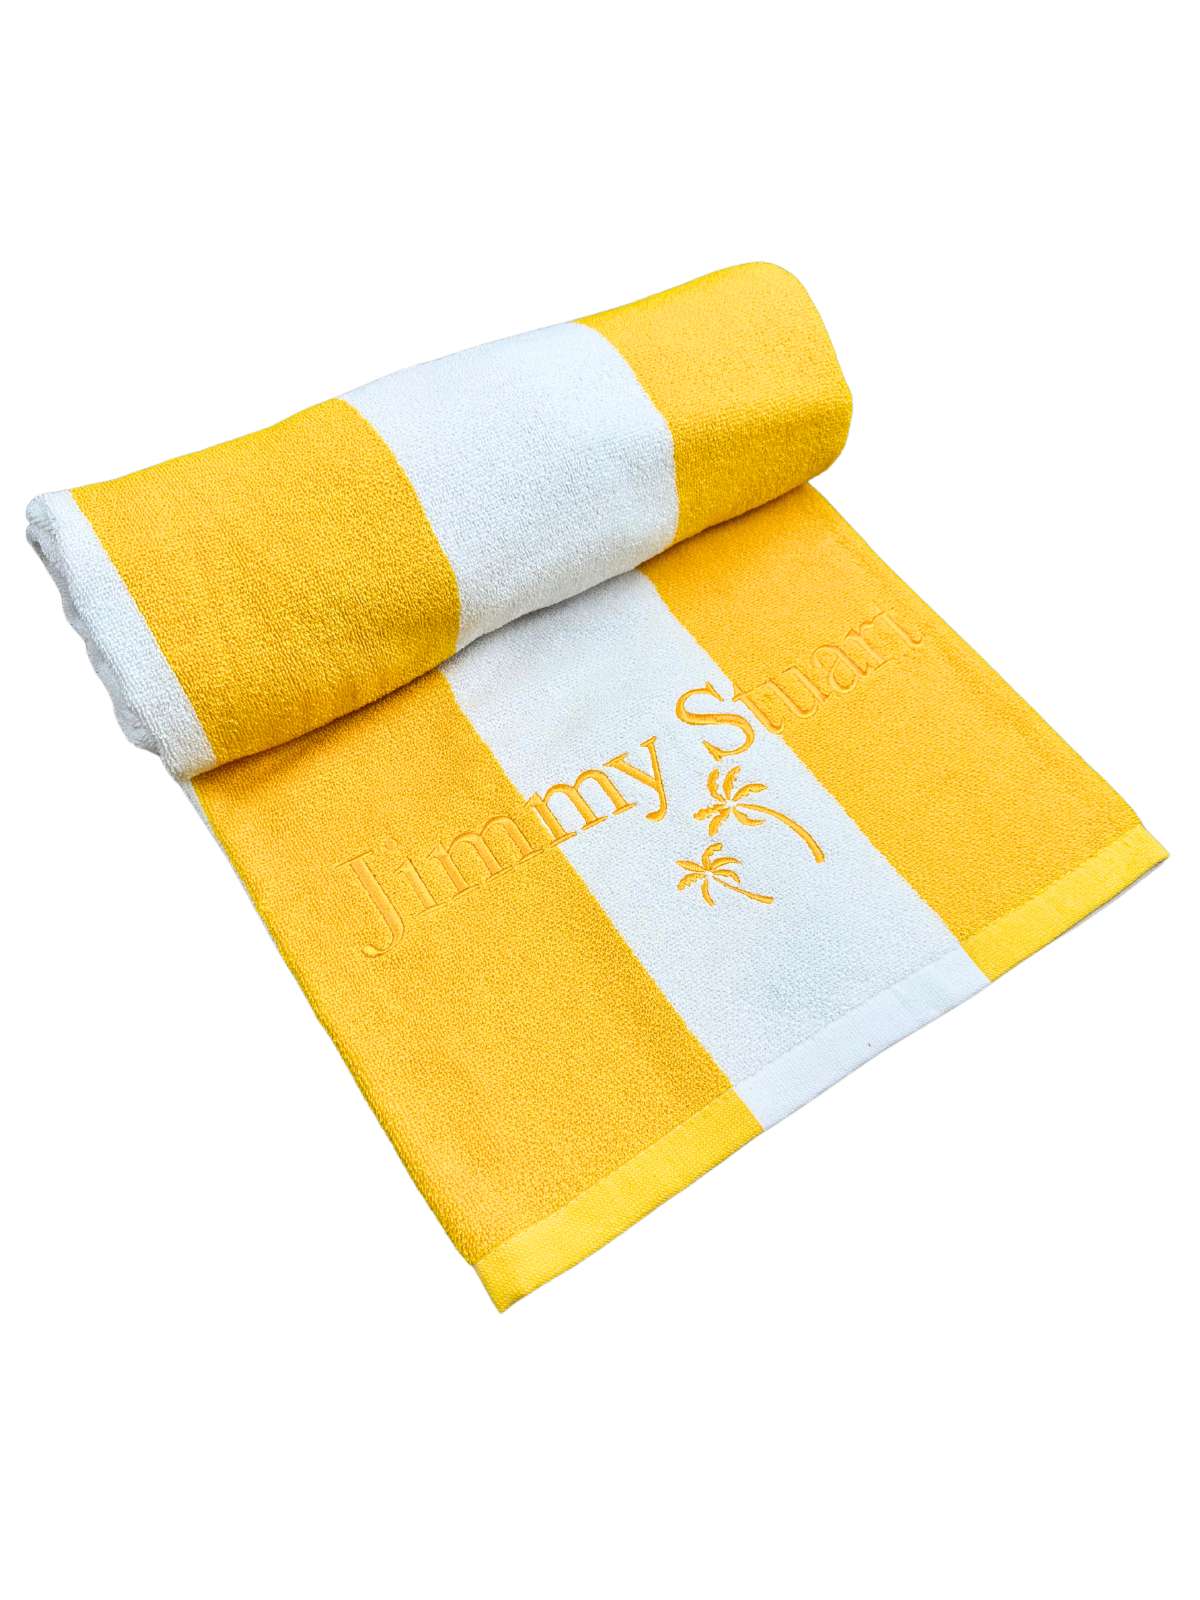 Yellow and White Striped Towel